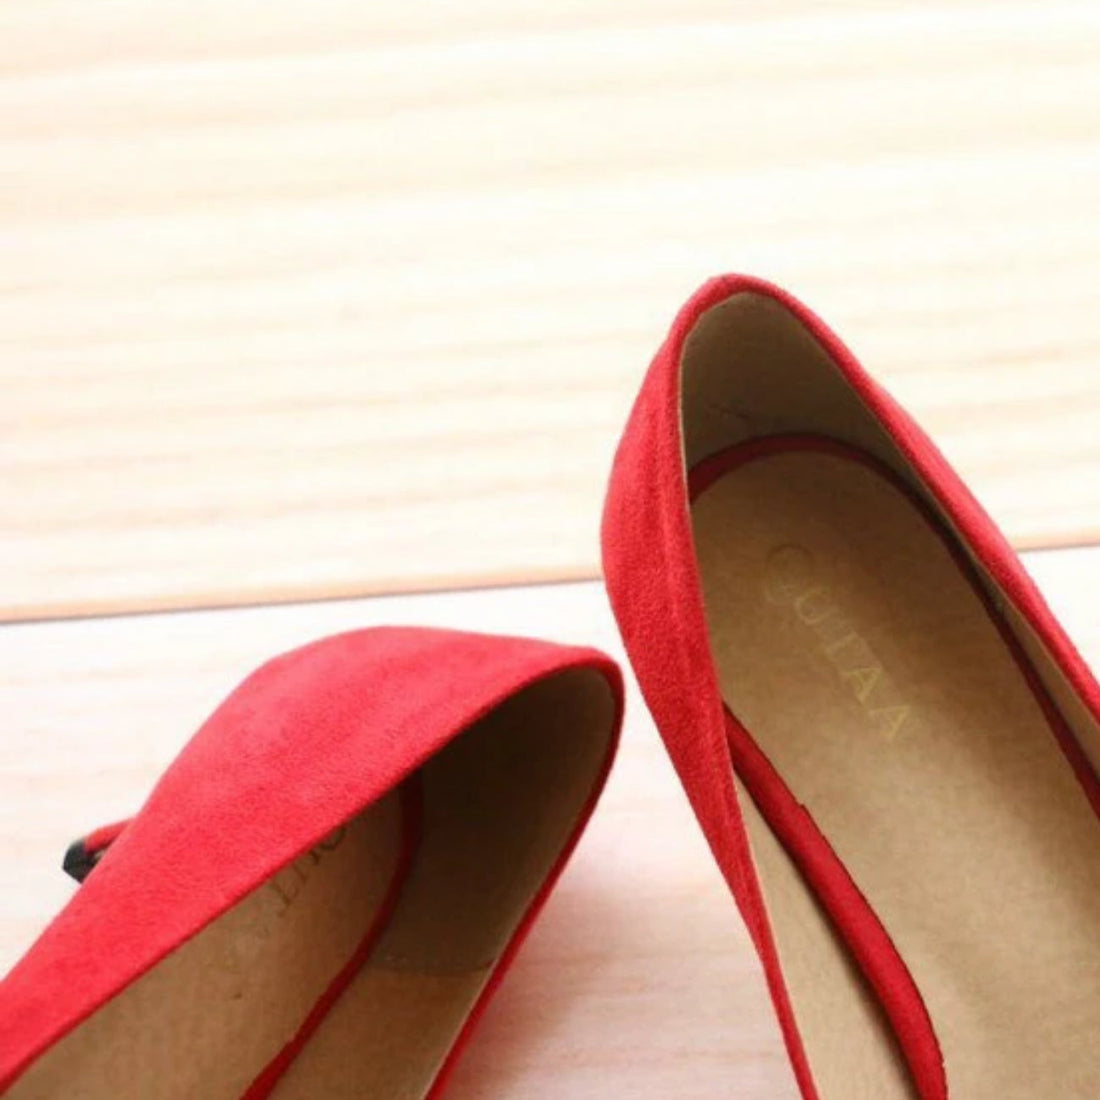 Women's Spring/Autumn Casual Pumps With Thin High Heels